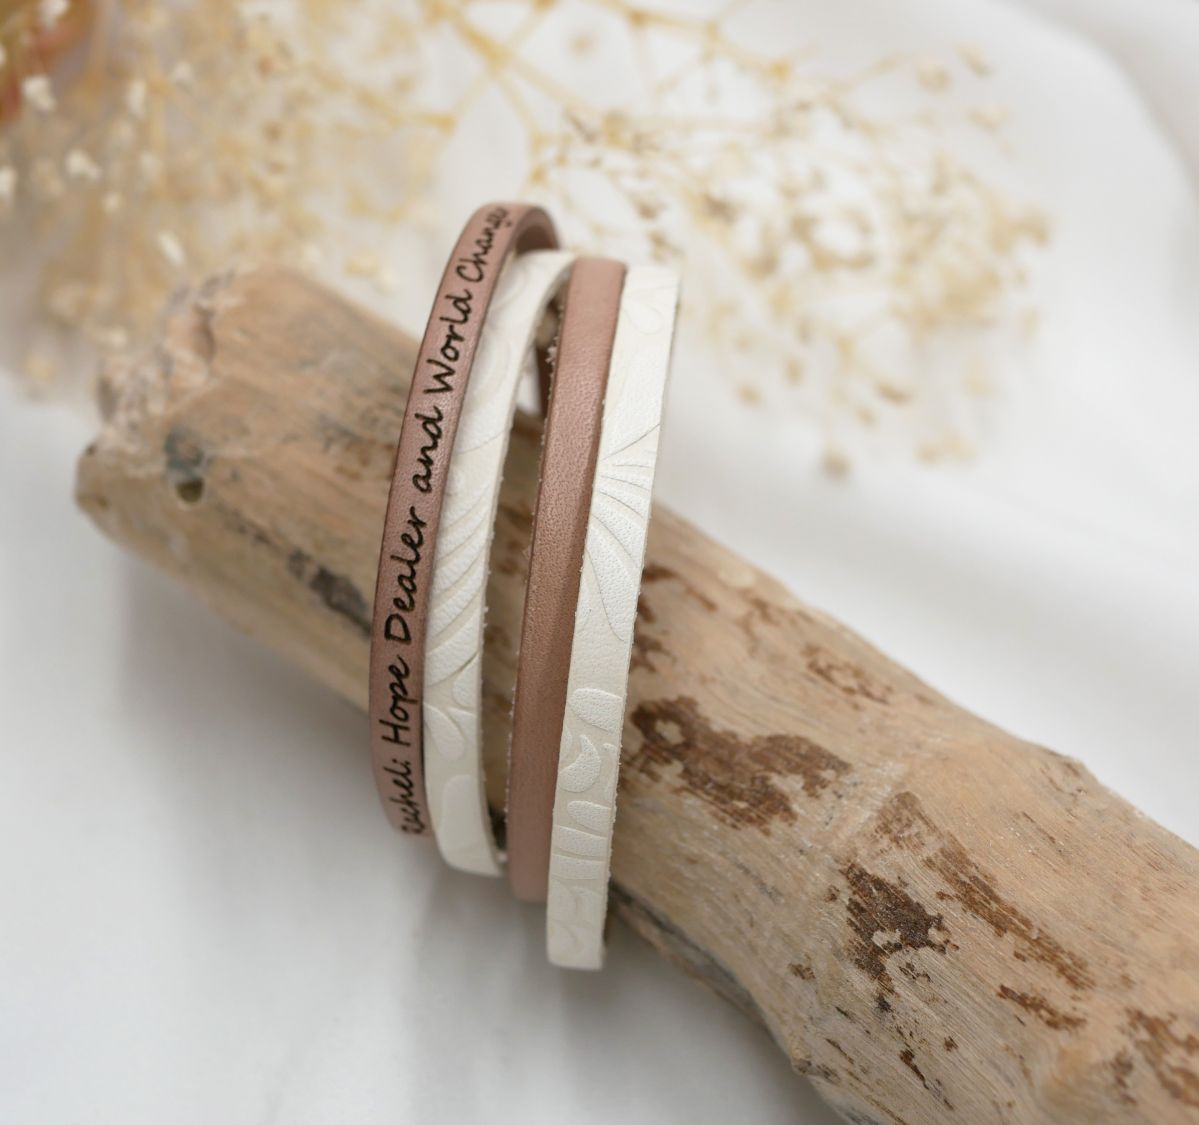 Double white leather bracelet with relief and color of your choice to be personalized by engraving